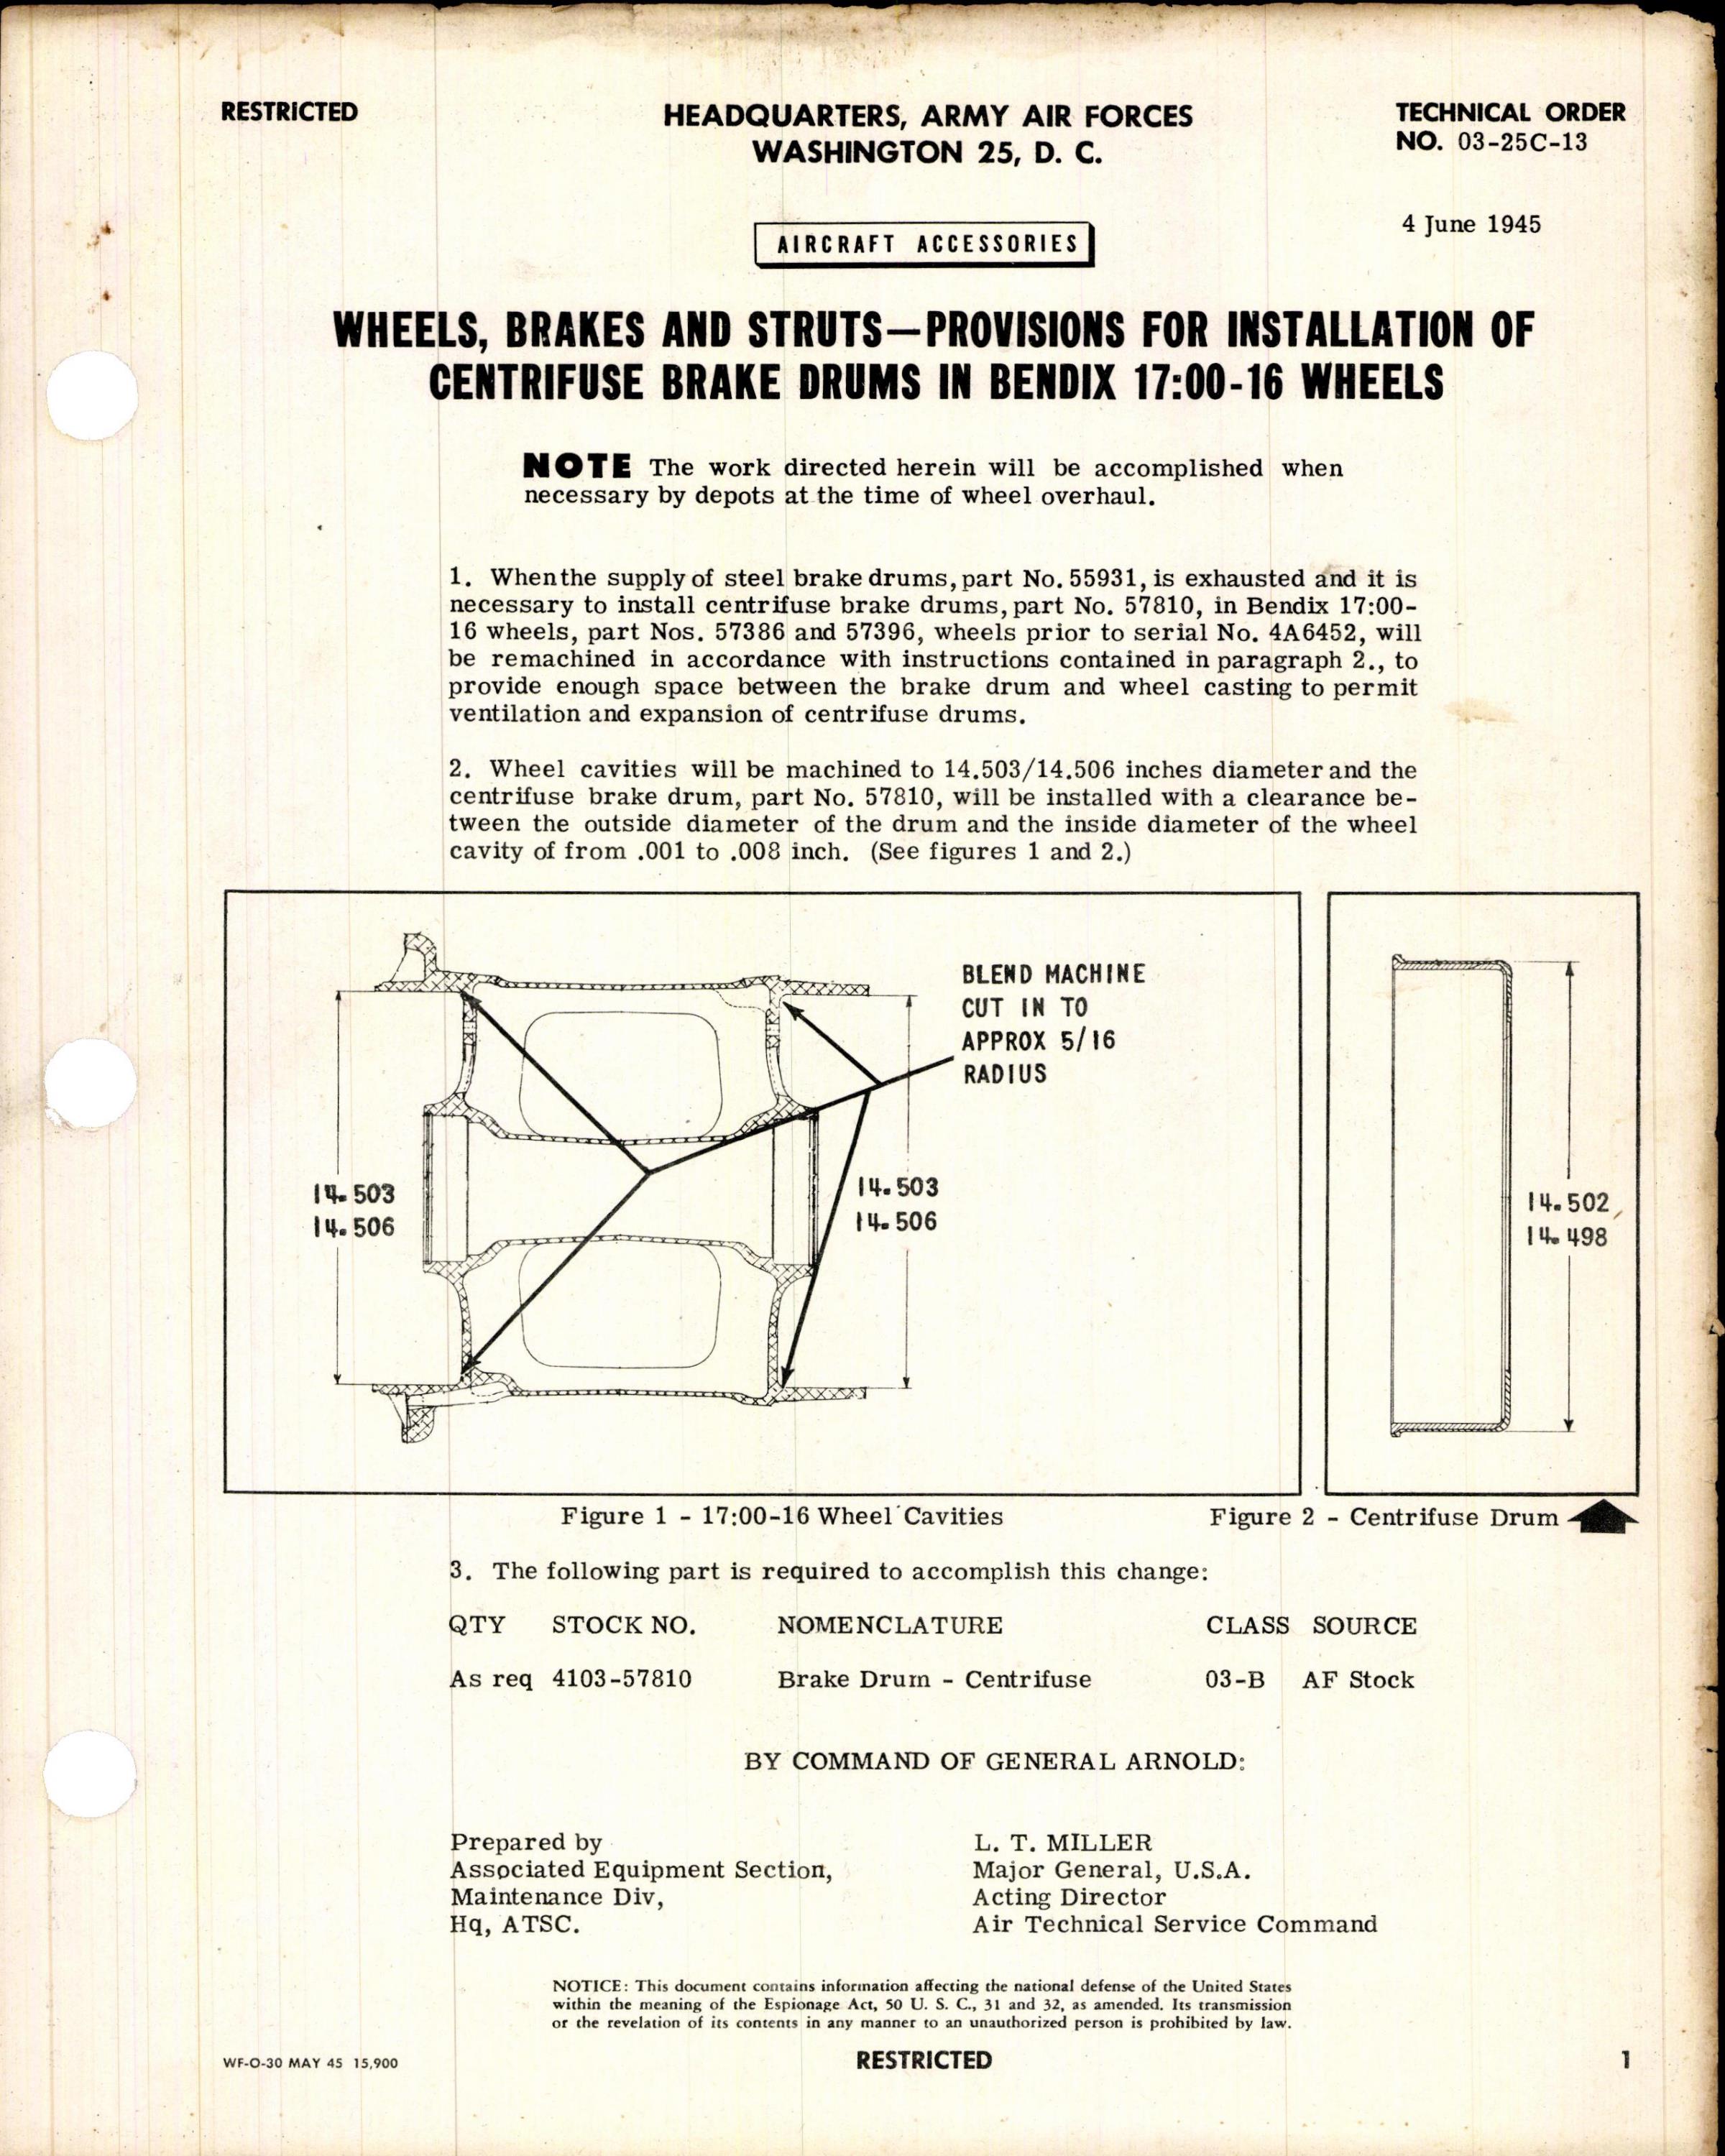 Sample page 1 from AirCorps Library document: Provisions for Installation of Centrifuse Brake Drums In Bendix 17:00-16 Wheels